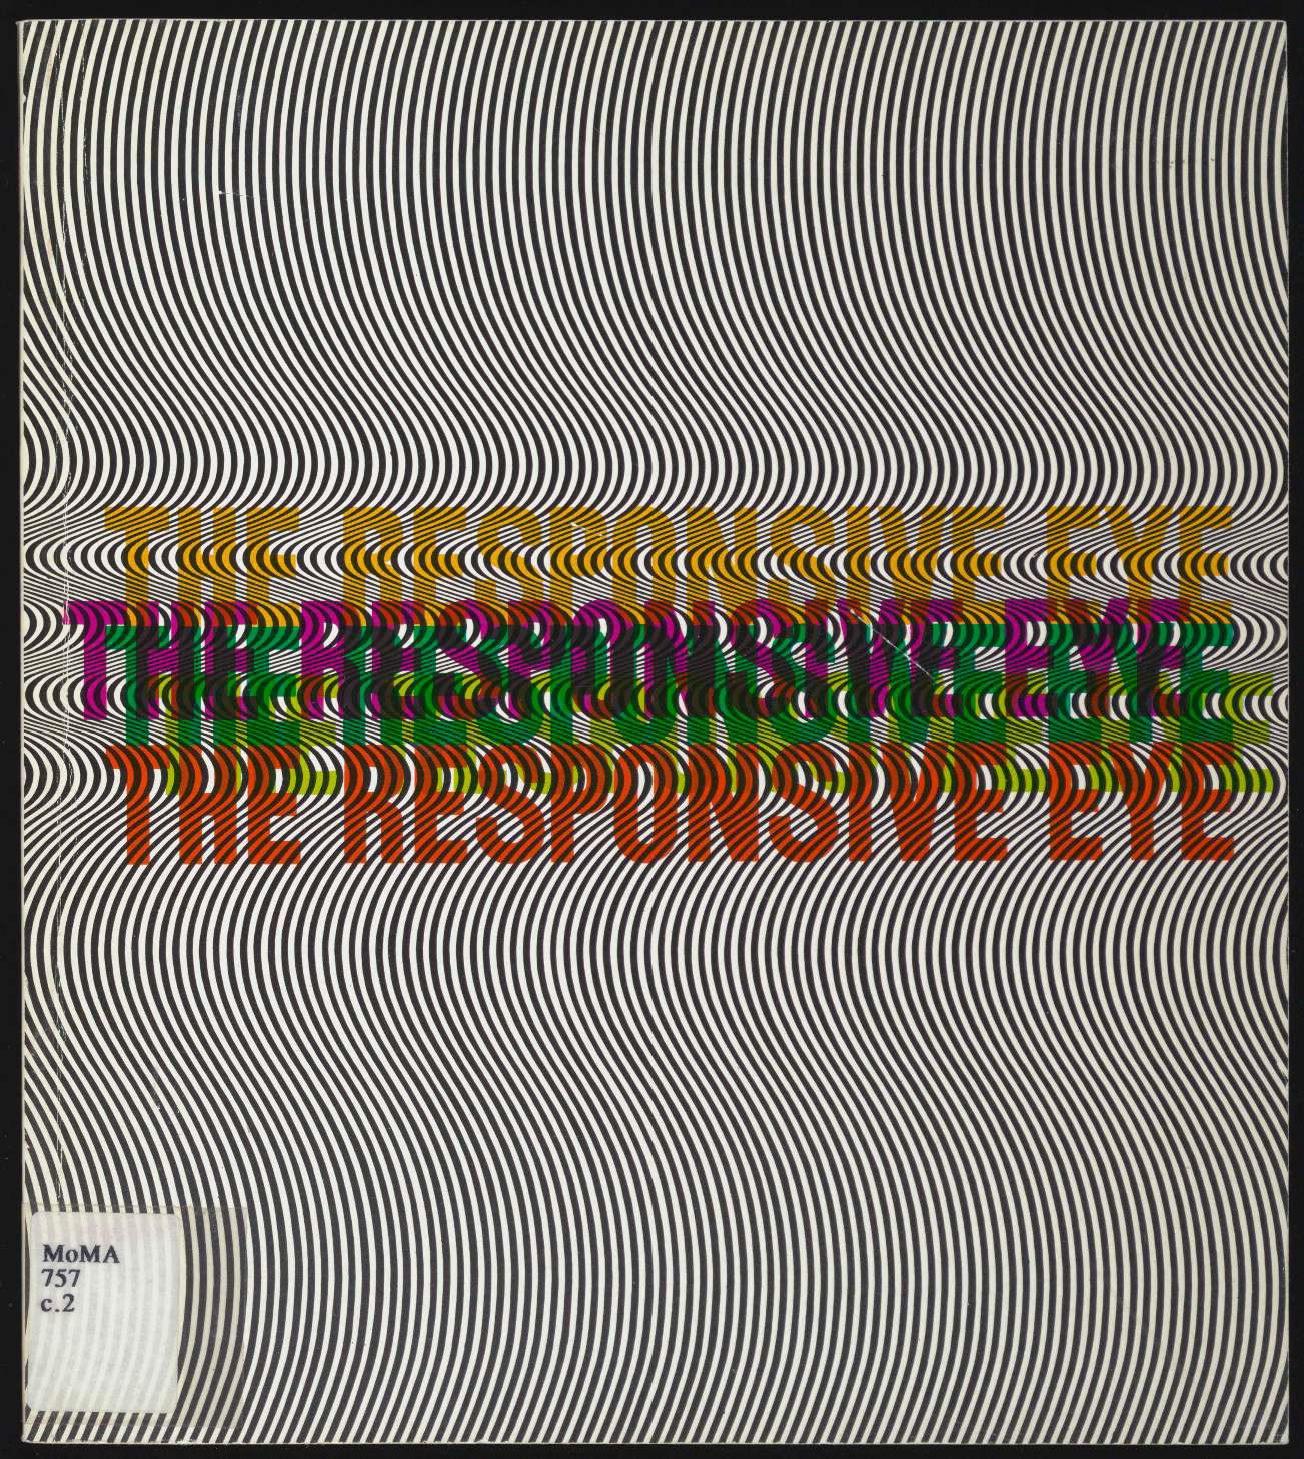 The Responsive Eye exhibition catalogue, The Museum of Modern Art, 1965